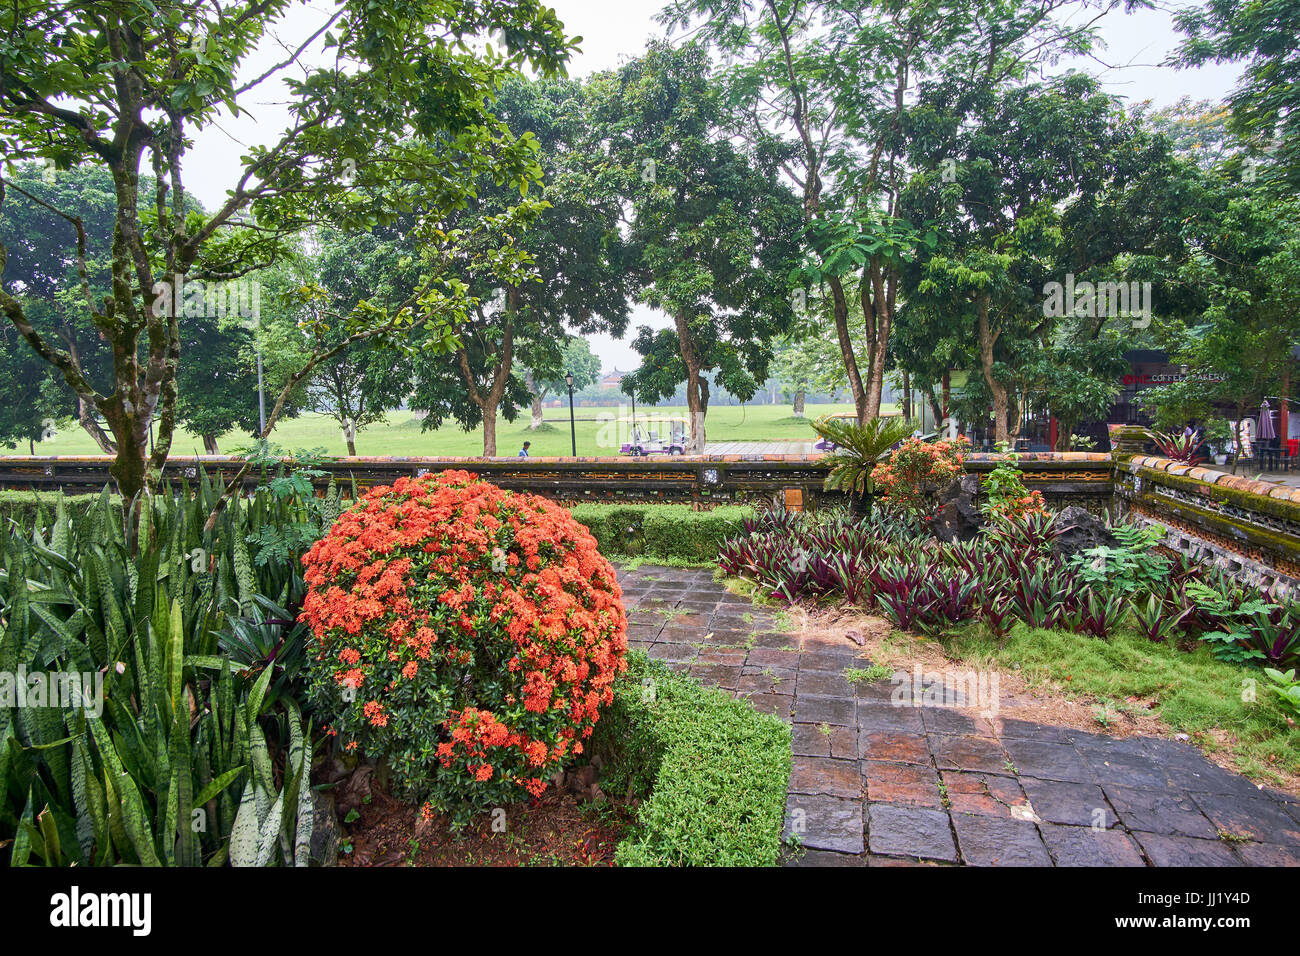 Plants, flowers and trees in the mist or fog. Park in the imperial city in vietnam. Stock Photo